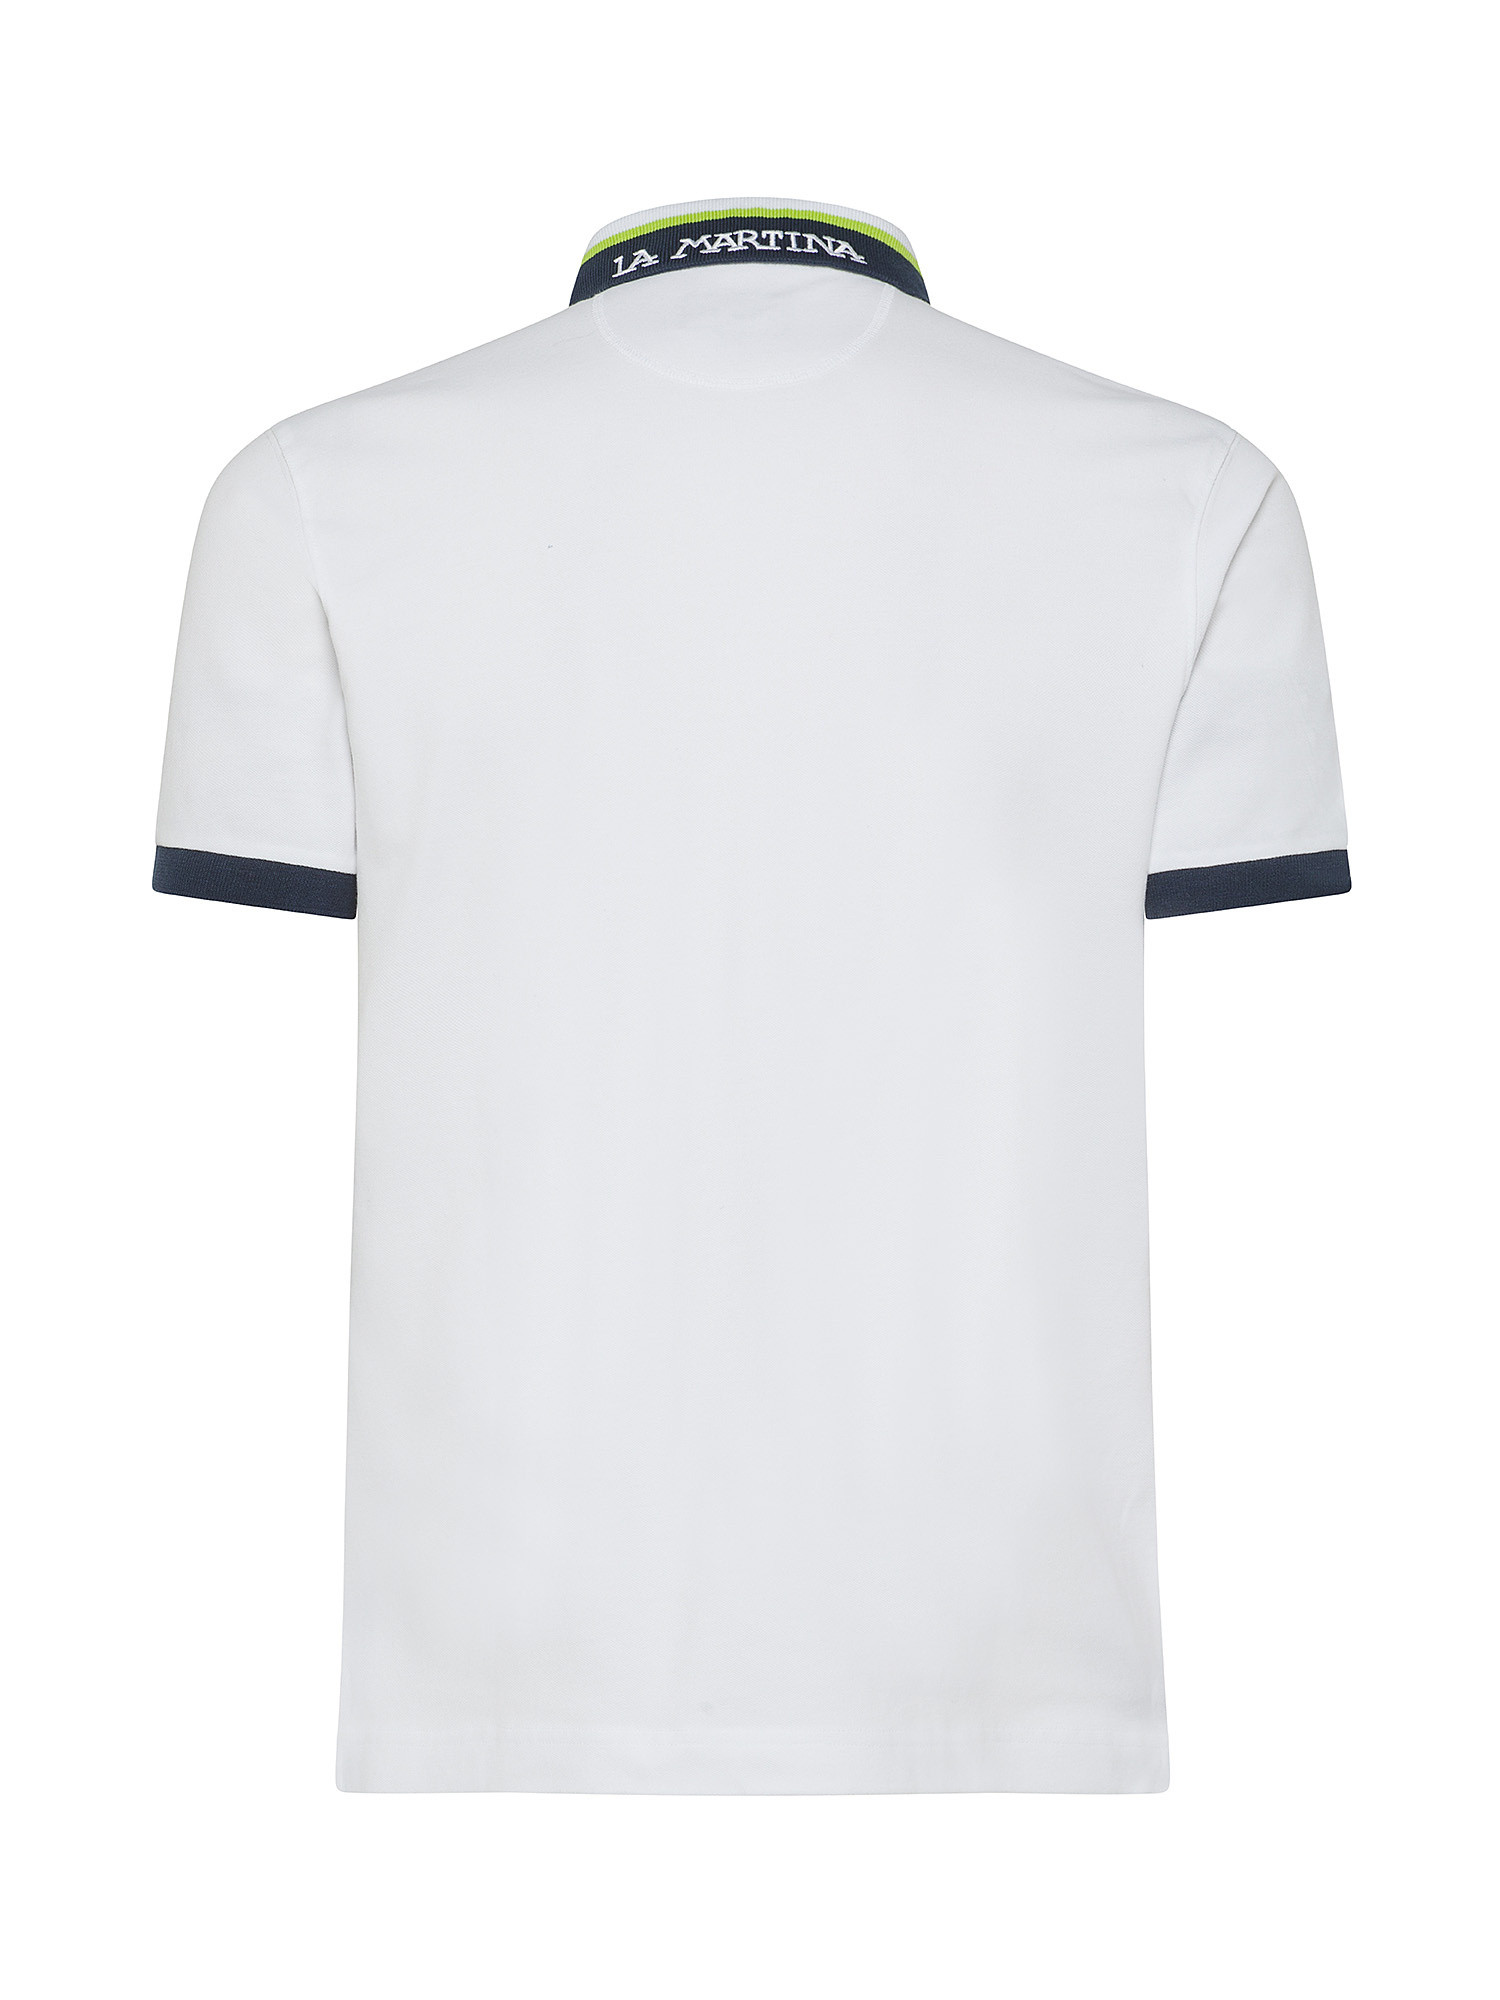 La Martina - Short-sleeved polo shirt in stretch piqué, White, large image number 1